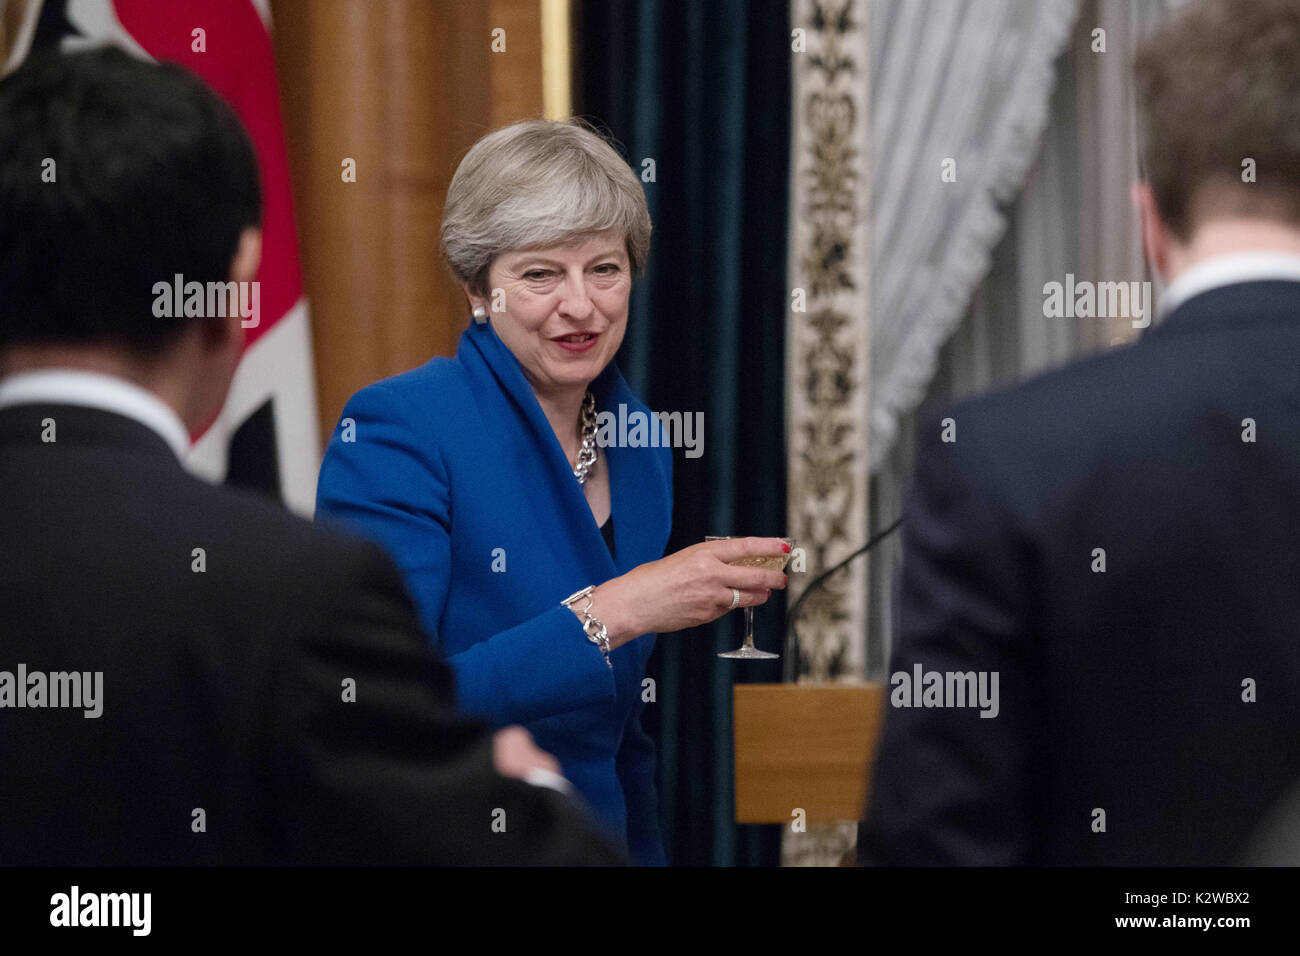 Prime Minister Theresa May attends a state banquet given in her honour by the Prime Minister of Japan Shinzo Abe, at the Akasaka Guest House in Tokyo. Stock Photo